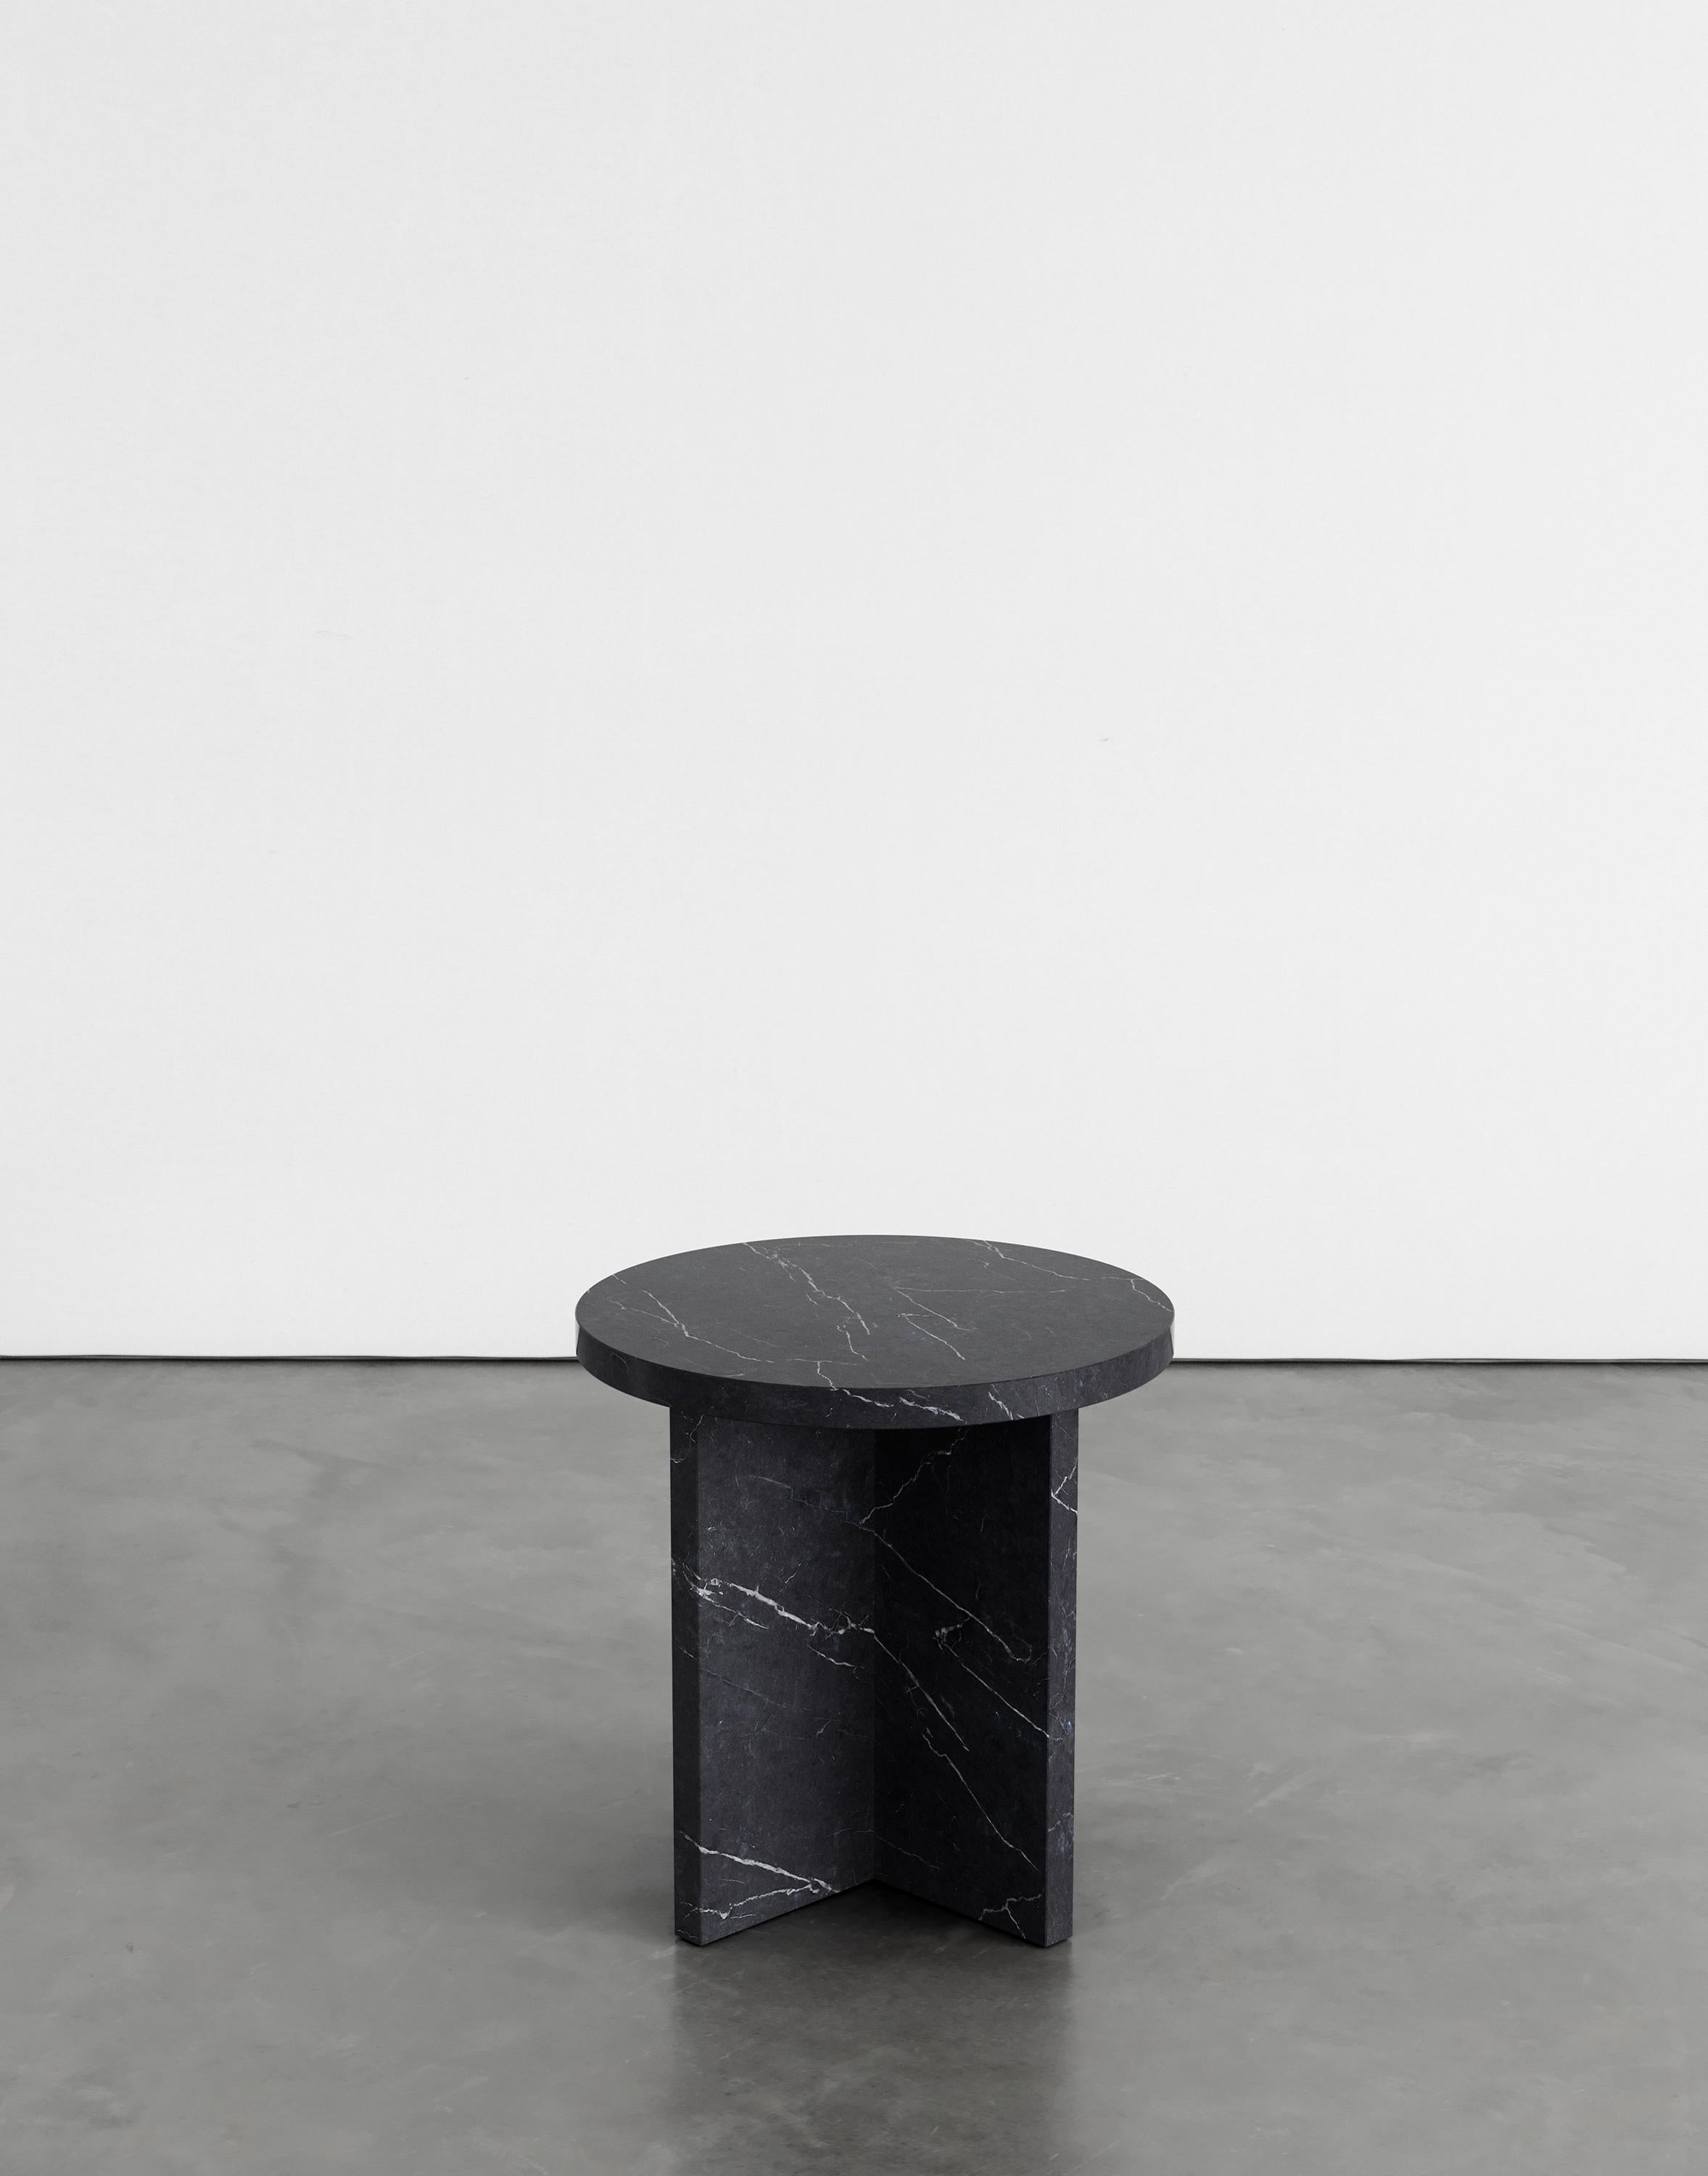 Rosa 45 side table by Agglomerati.
Dimensions: D 45 x H 45 cm.
Materials: Nero Marquina marble.
Available in other stones.

Rosa side table celebrates simplicity. It has striking geometric proportions that create a harmonious